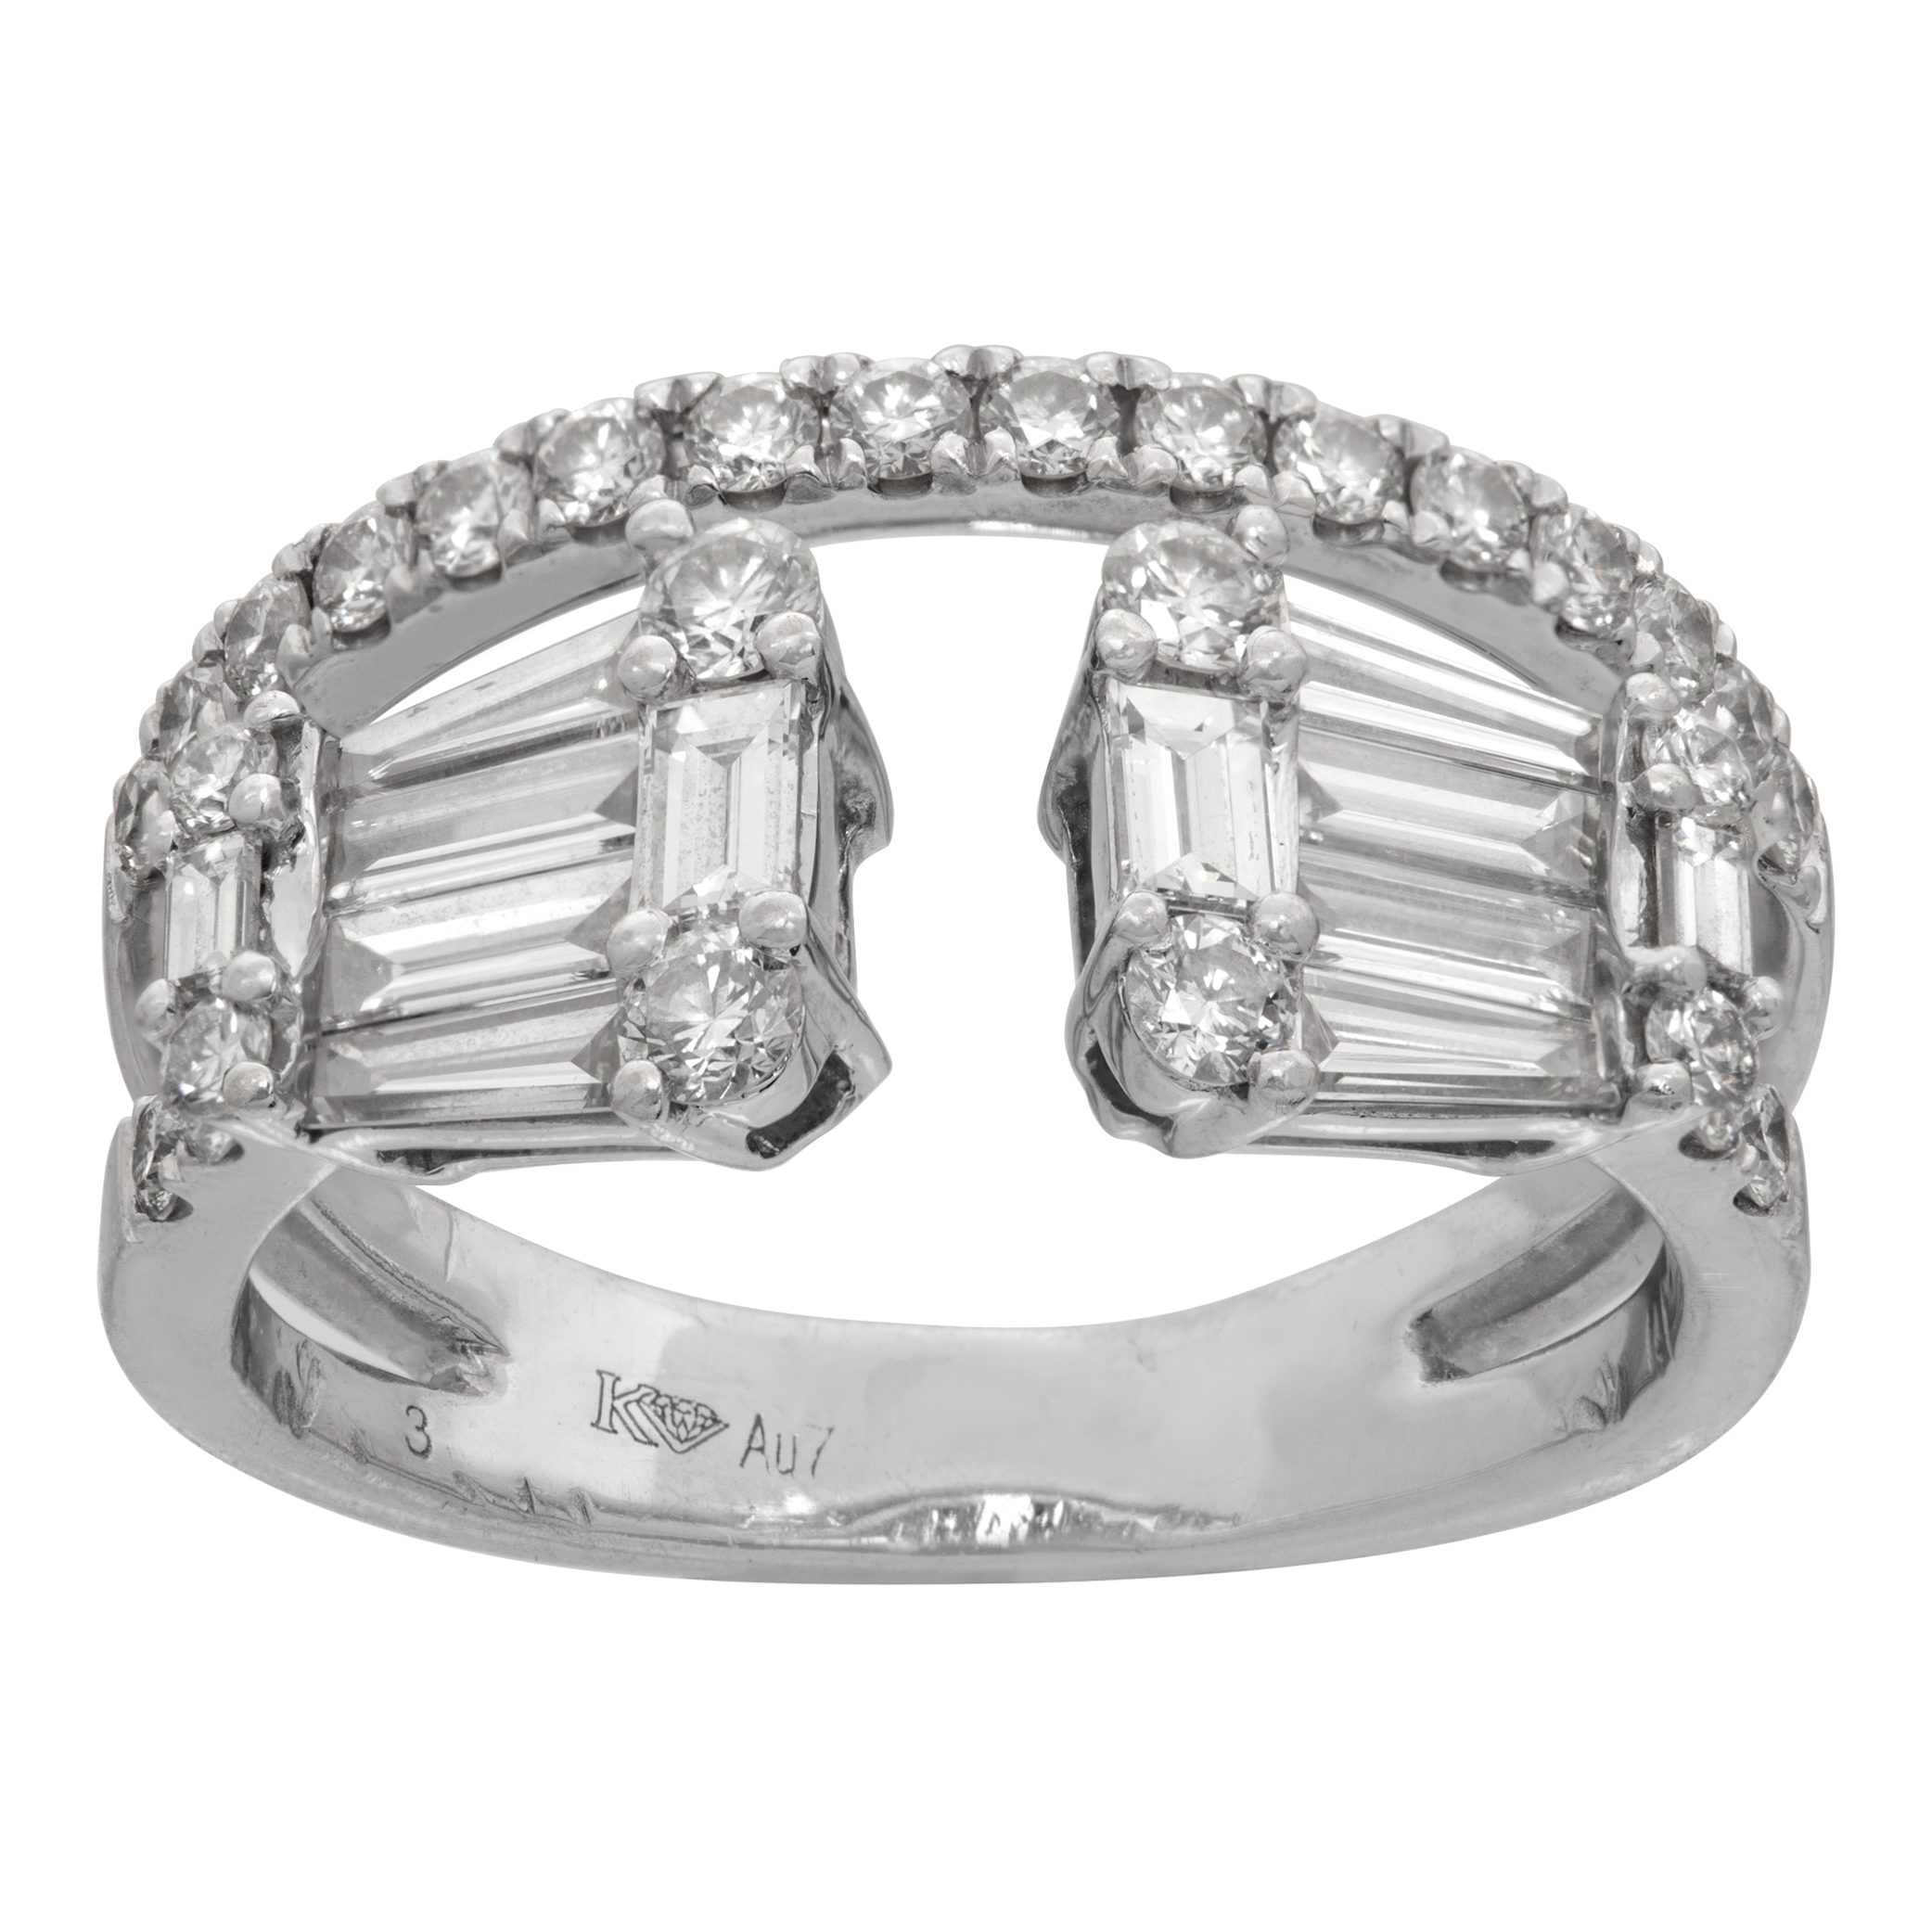 Kwiat diamond ring with round and bagutte diamonds in 18k white gold